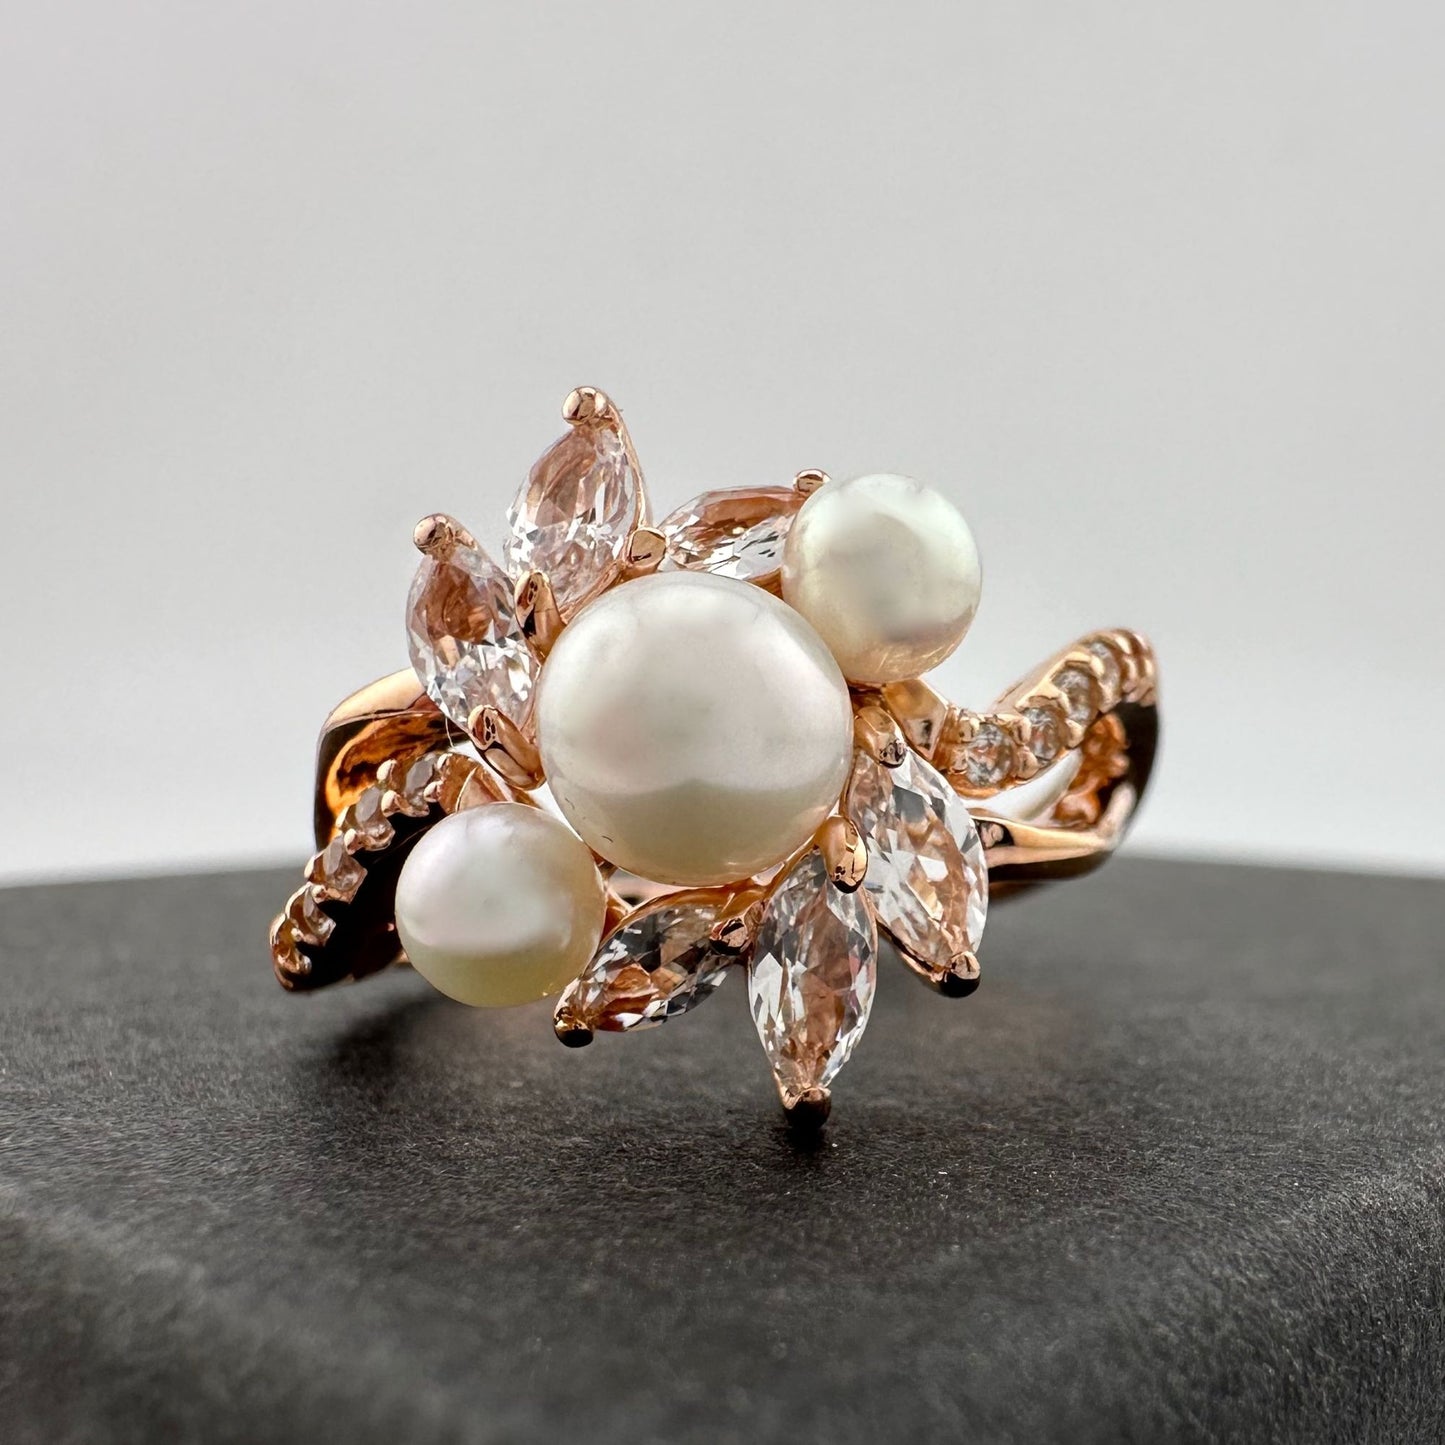 Beautiful Pearl and White Gemstone Cocktail Ring 14kt Gold Overlay Sterling Silver Size 8.25